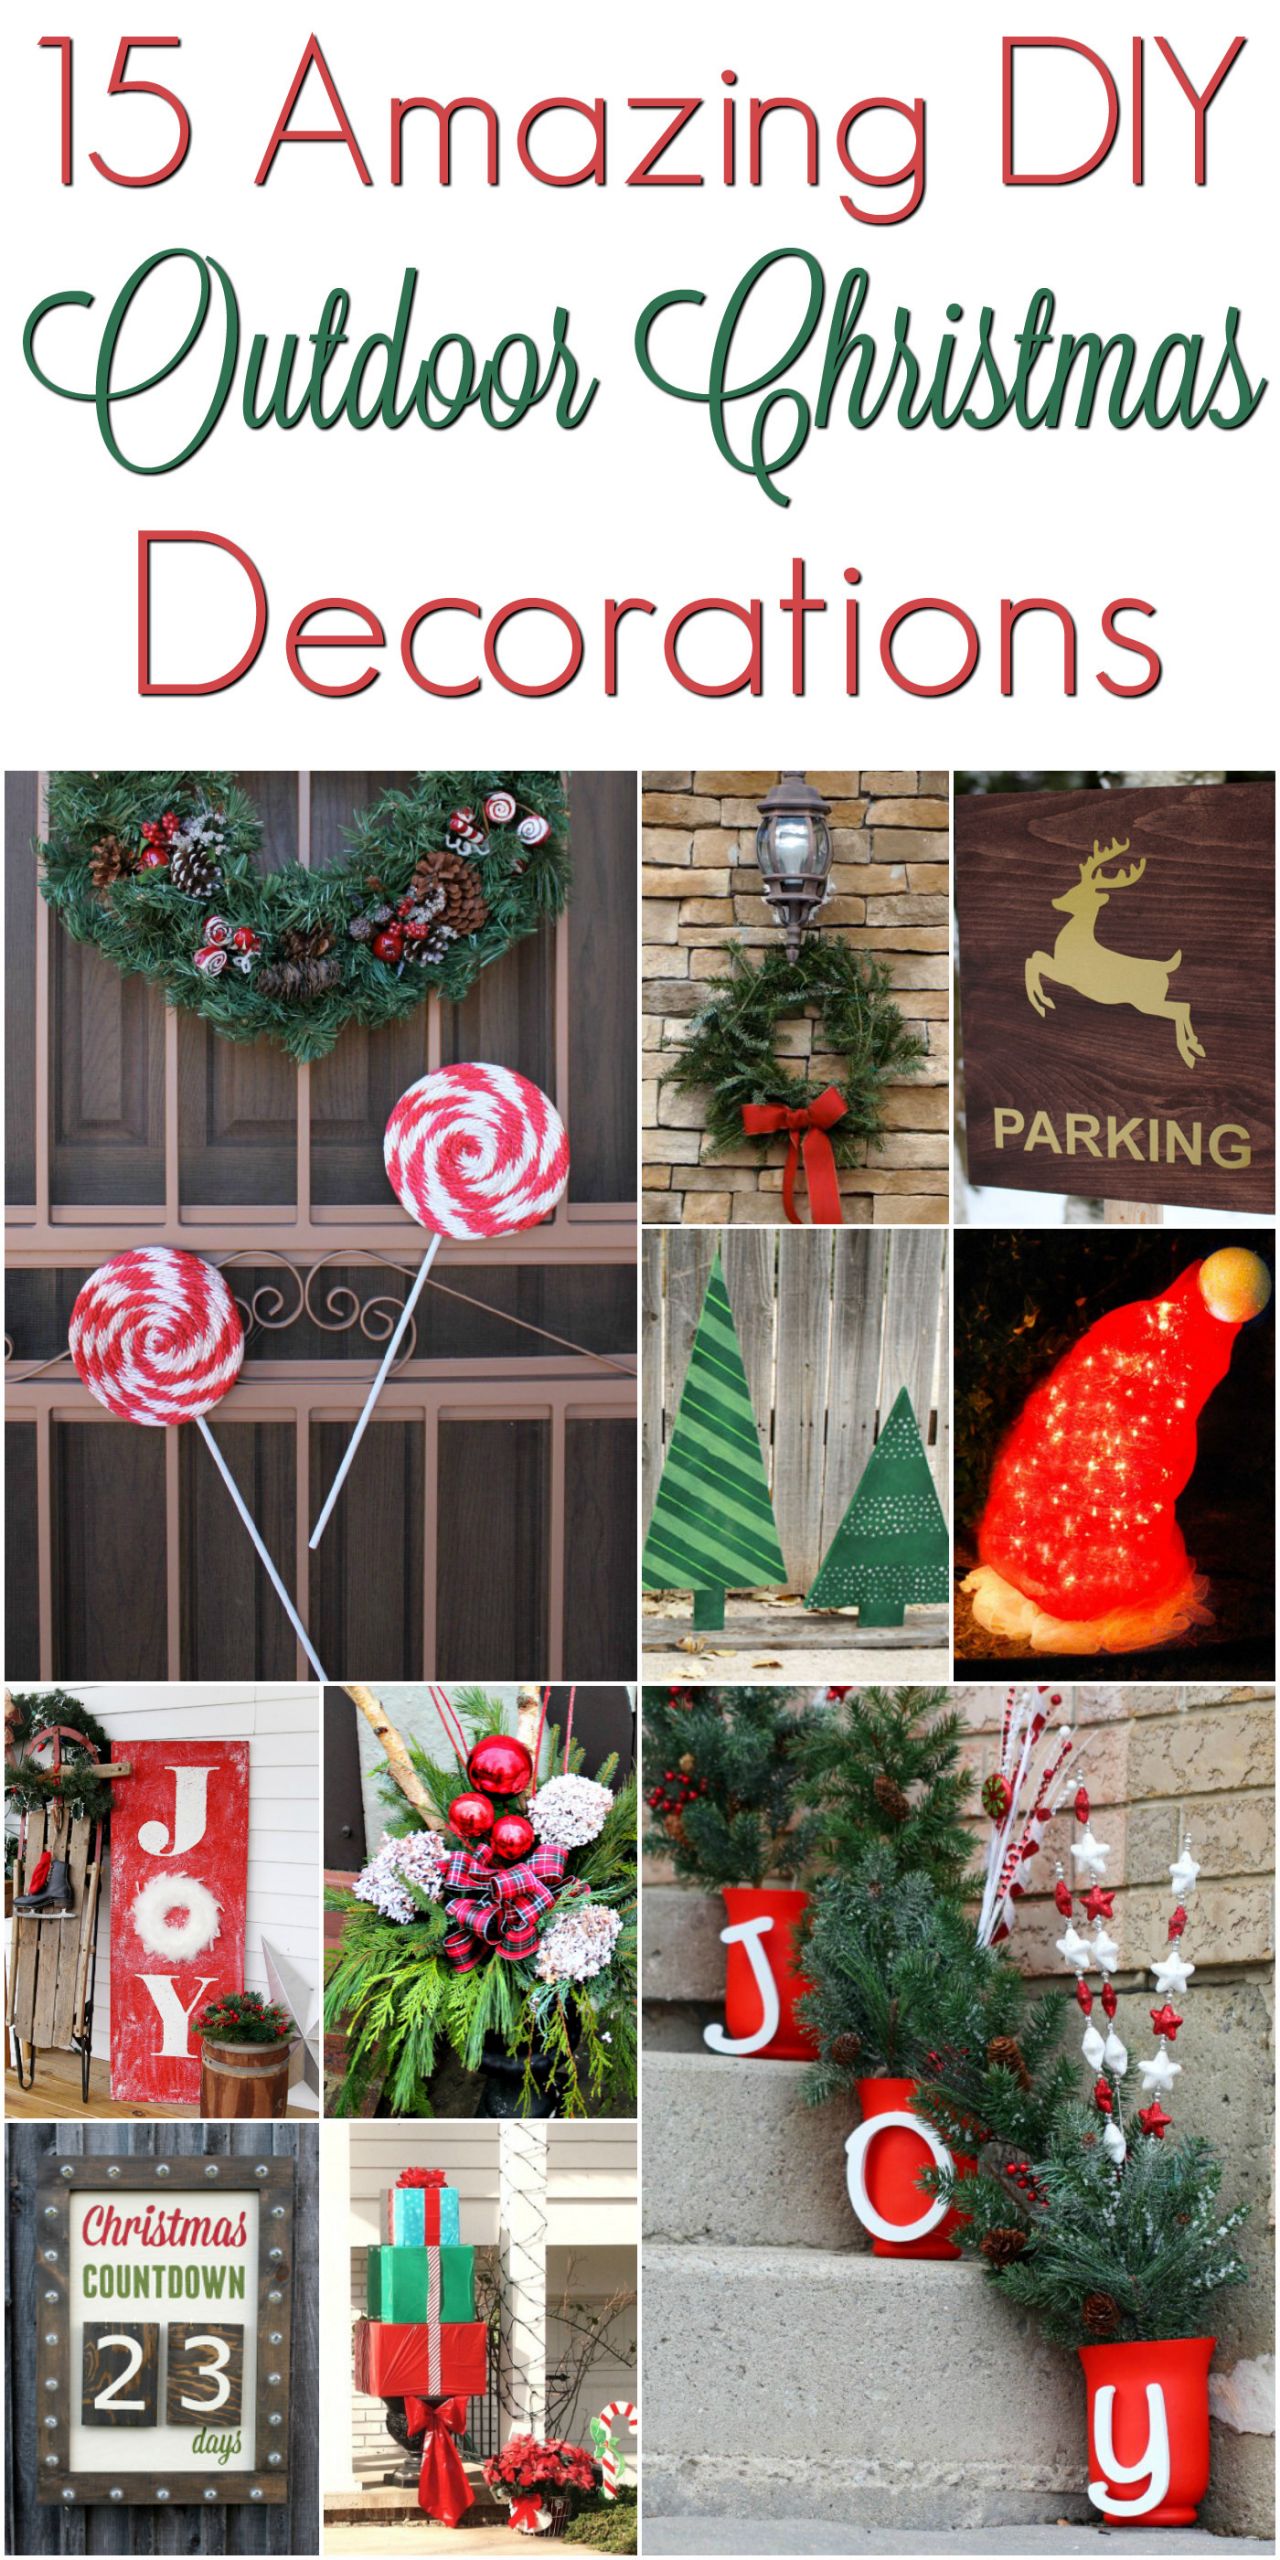 Christmas Ideas For Outside
 DIY Christmas Outdoor Decorations ChristmasDecorations